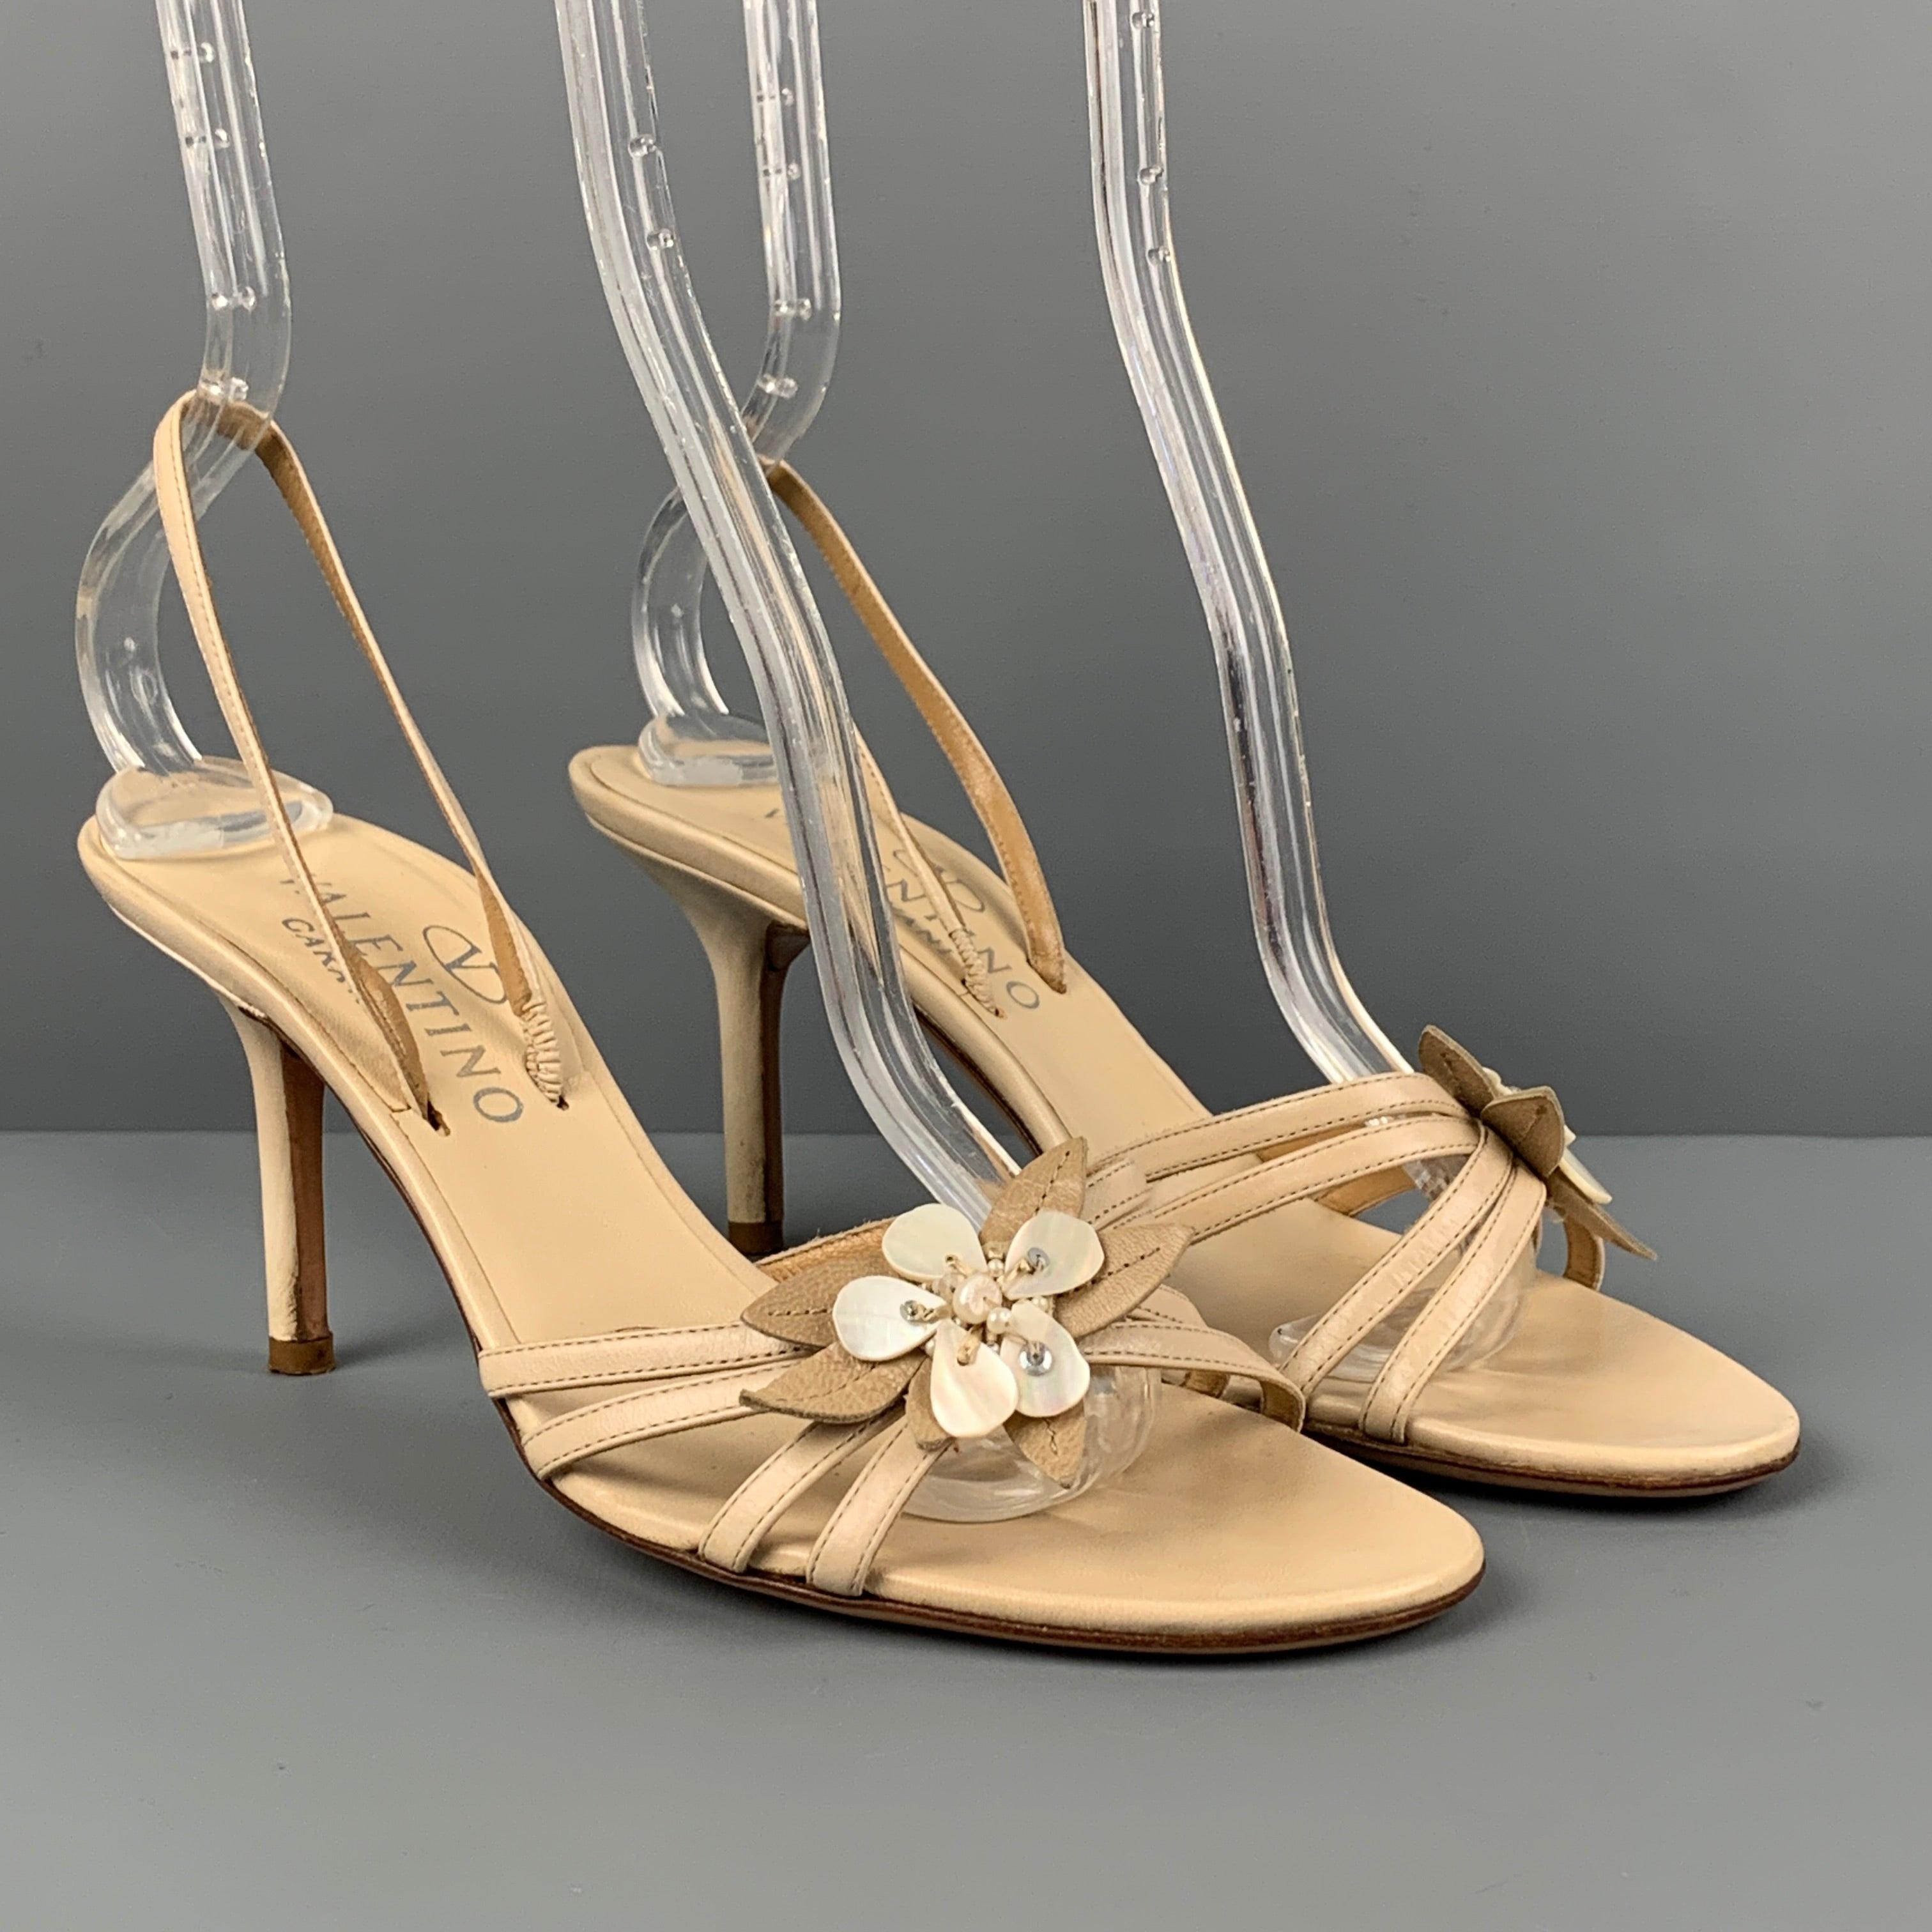 VALENTINO GARAVANI sandals comes in a beige leather featuring a slingback style, open toe, flower applique detail, and a stiletto heel. Made in Italy.Very Good
Pre-Owned Condition. 

Marked:   37 

Measurements: 
  Heel: 3 inches 
  
  
 
Reference: